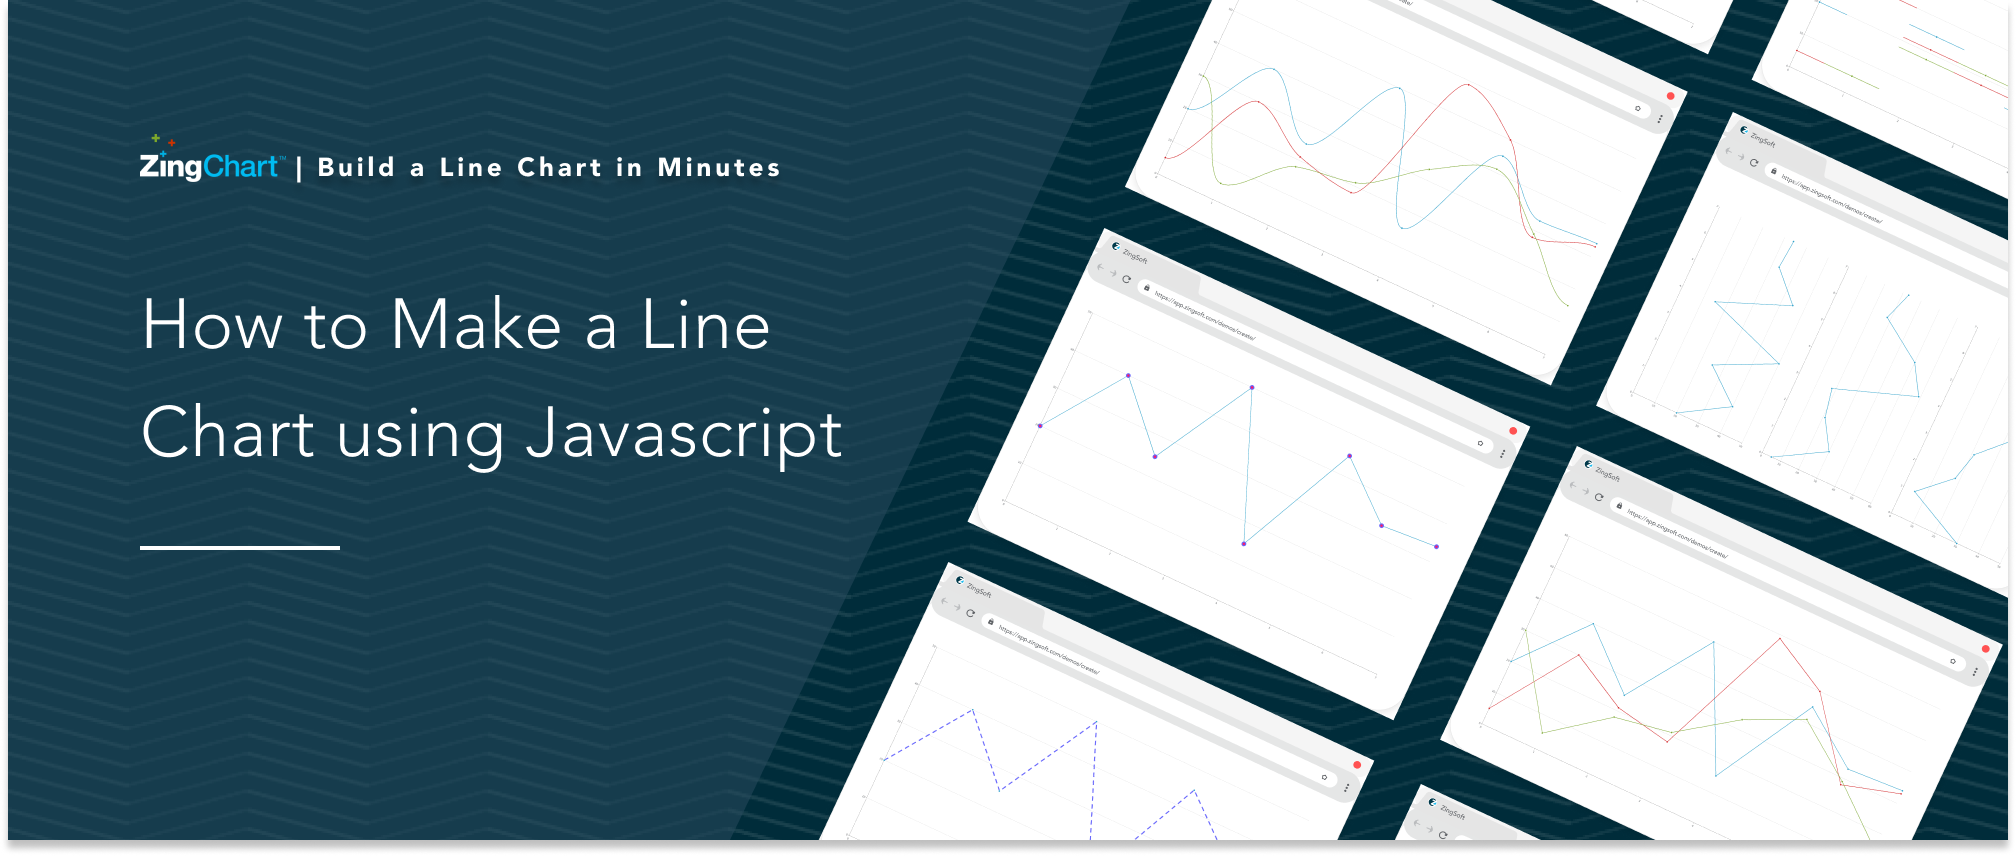 Cover image for 'How to Make a Line Chart Using JavaScript' blog post